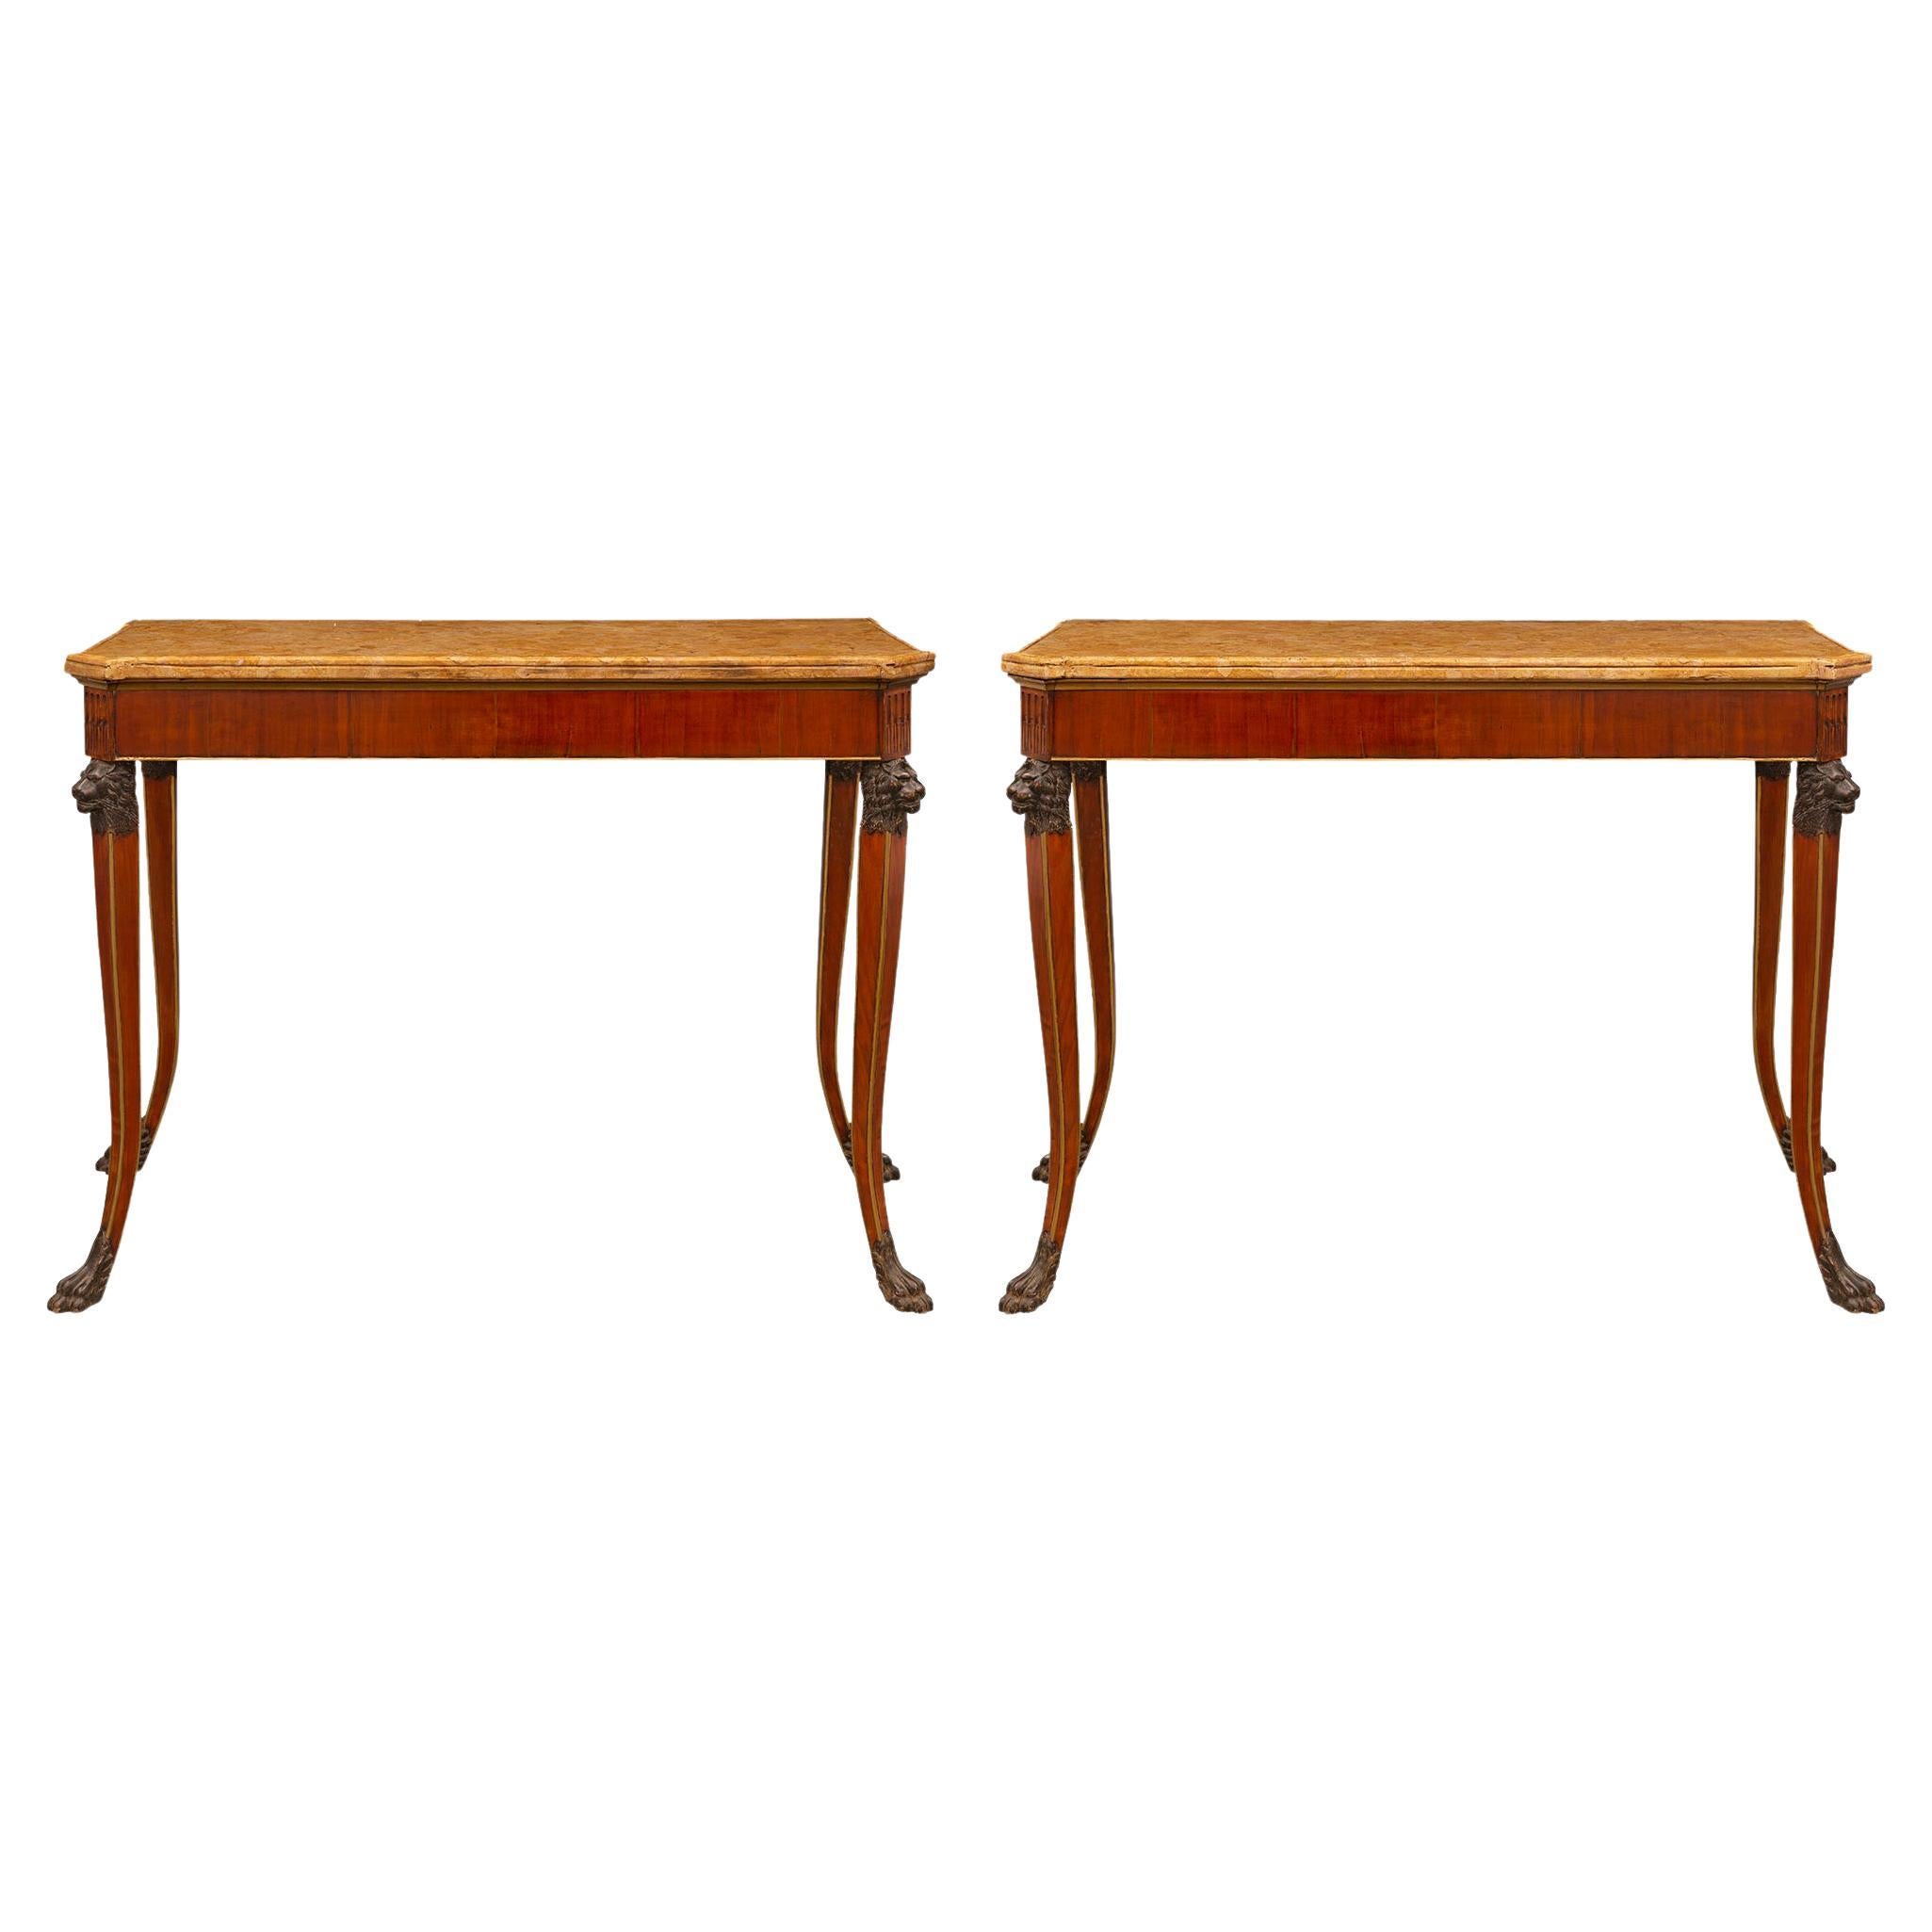 Pair of 19th Century Roman Neo-Classical St. Cherry Wood Consoles For Sale